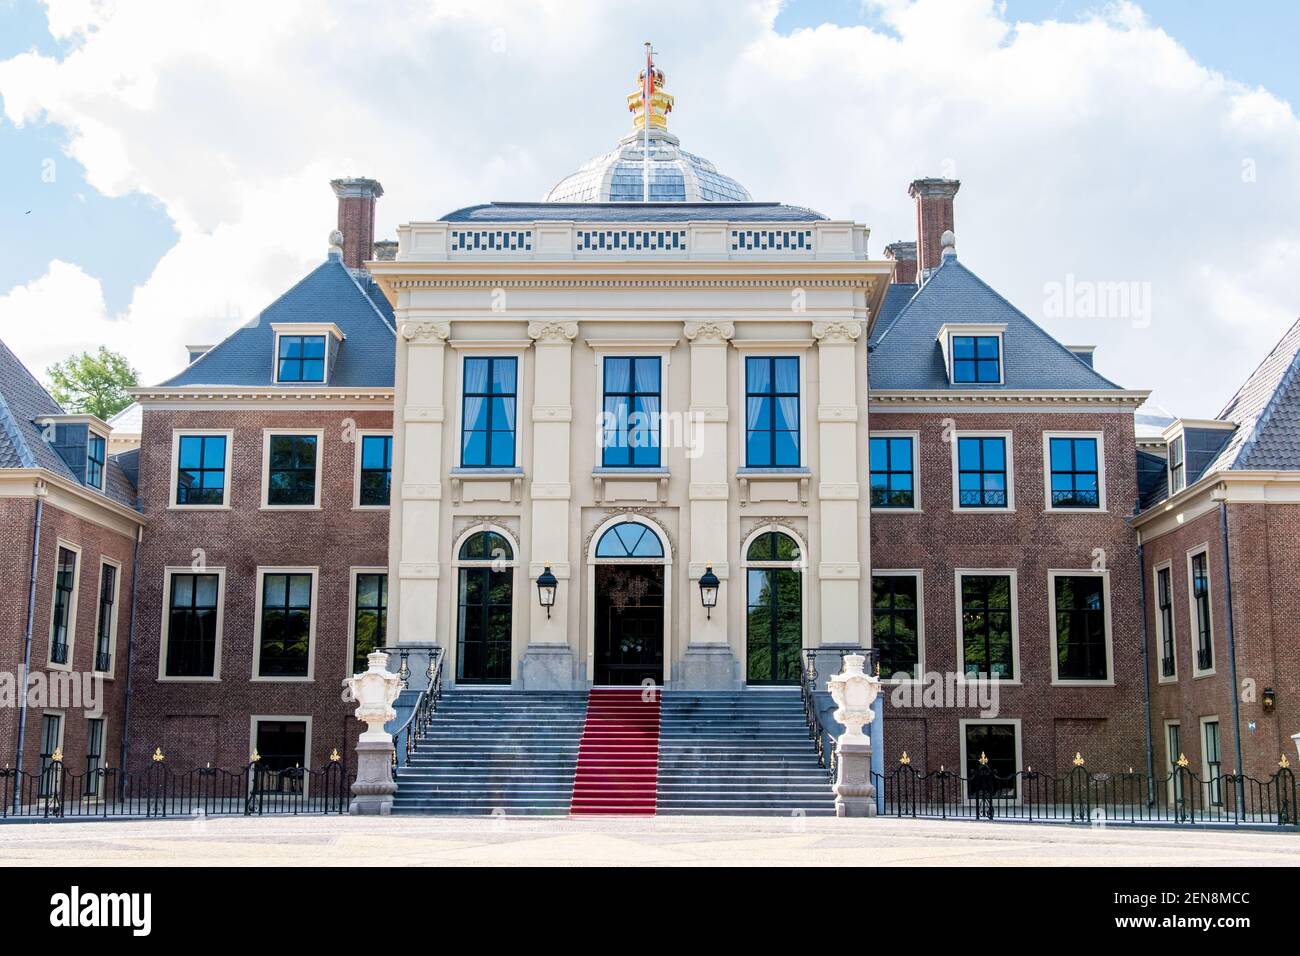 Huis ten Bosch Palace, after the renovation of the interior and exterior of  the Royal Palace, the new home of King Willem-Alexander and Queen Maxima of  the Netherlands. (Photo by DPPA/Sipa USA